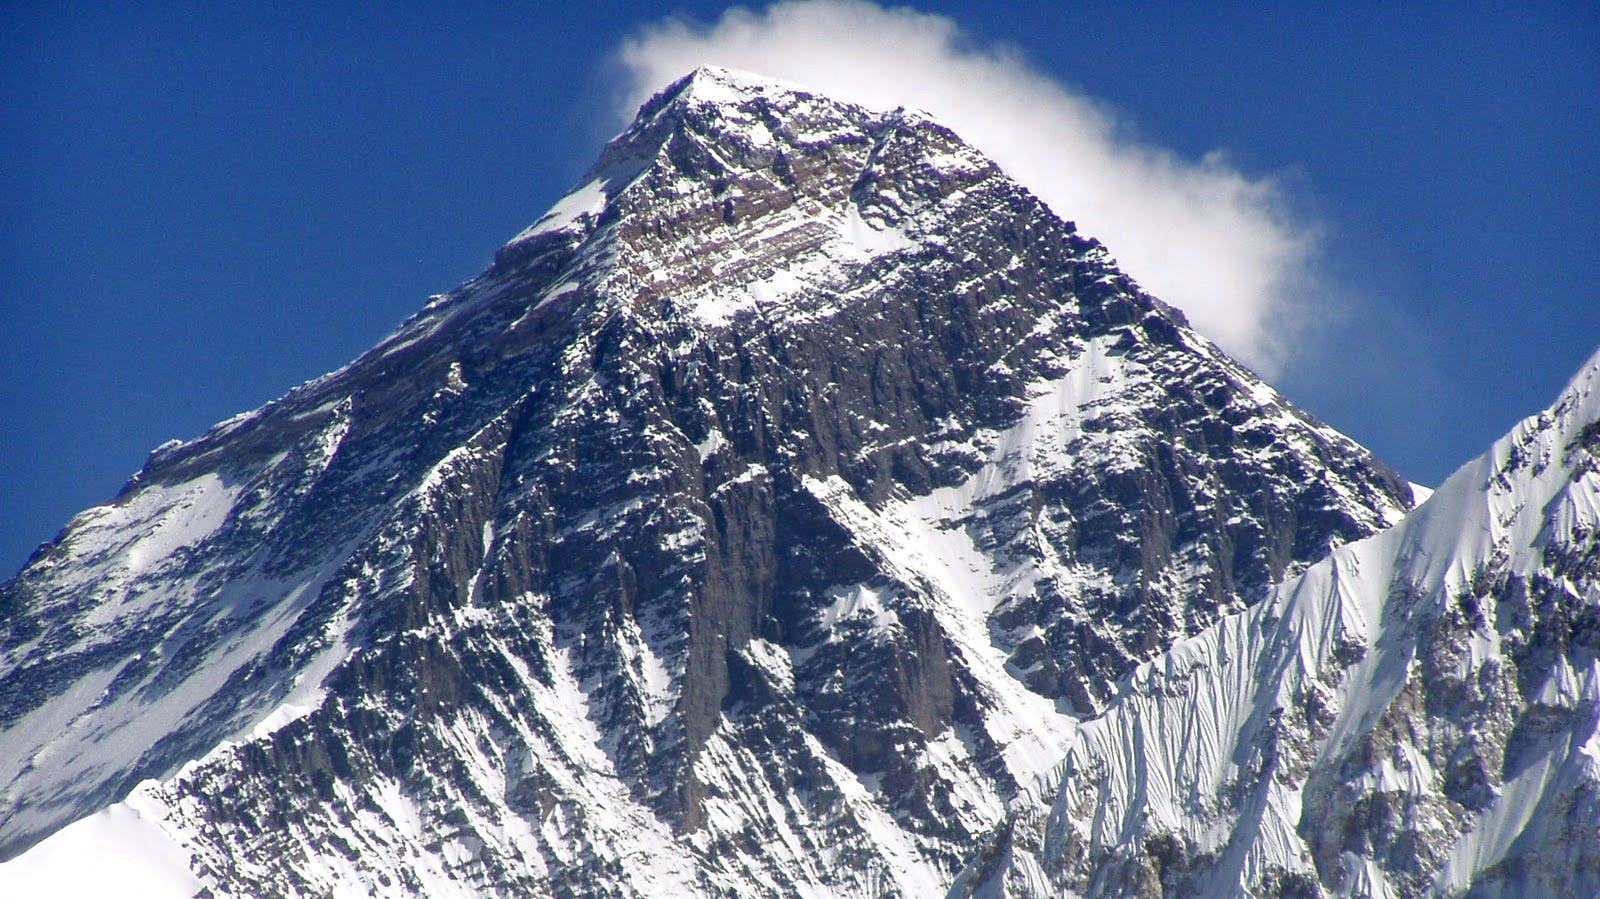 Best Way to See Mt Everest Without Trekking